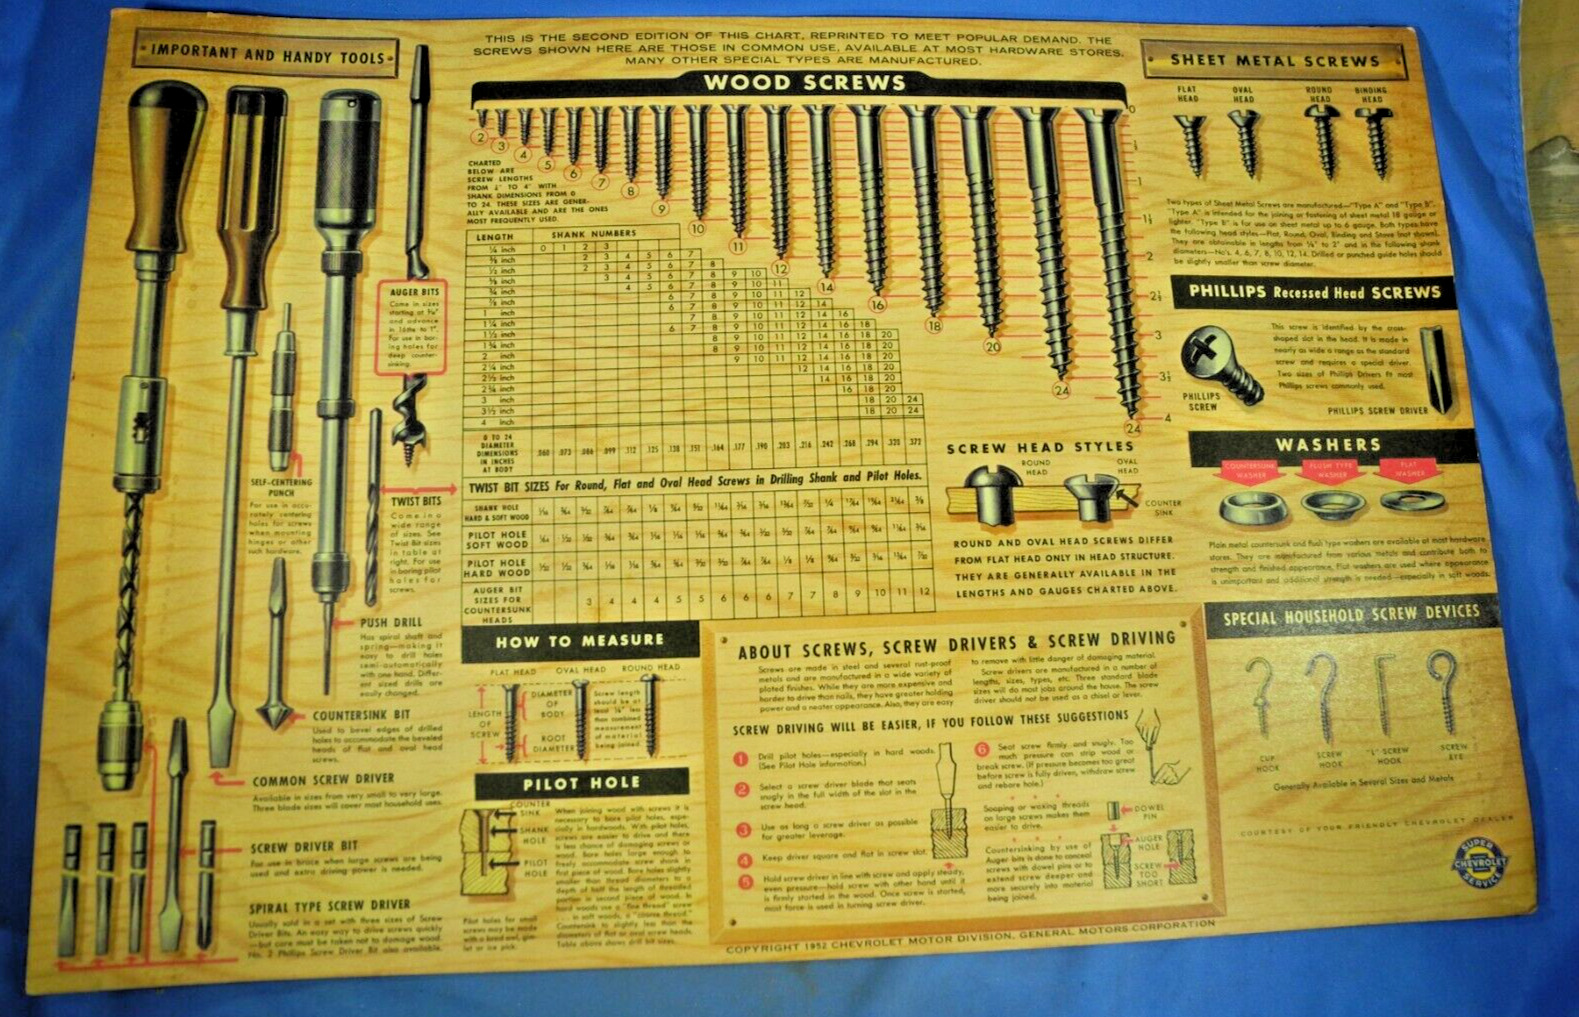 1952 Chevrolet Super Service All about Screws, Screw Drivers & Screw Drive Chart